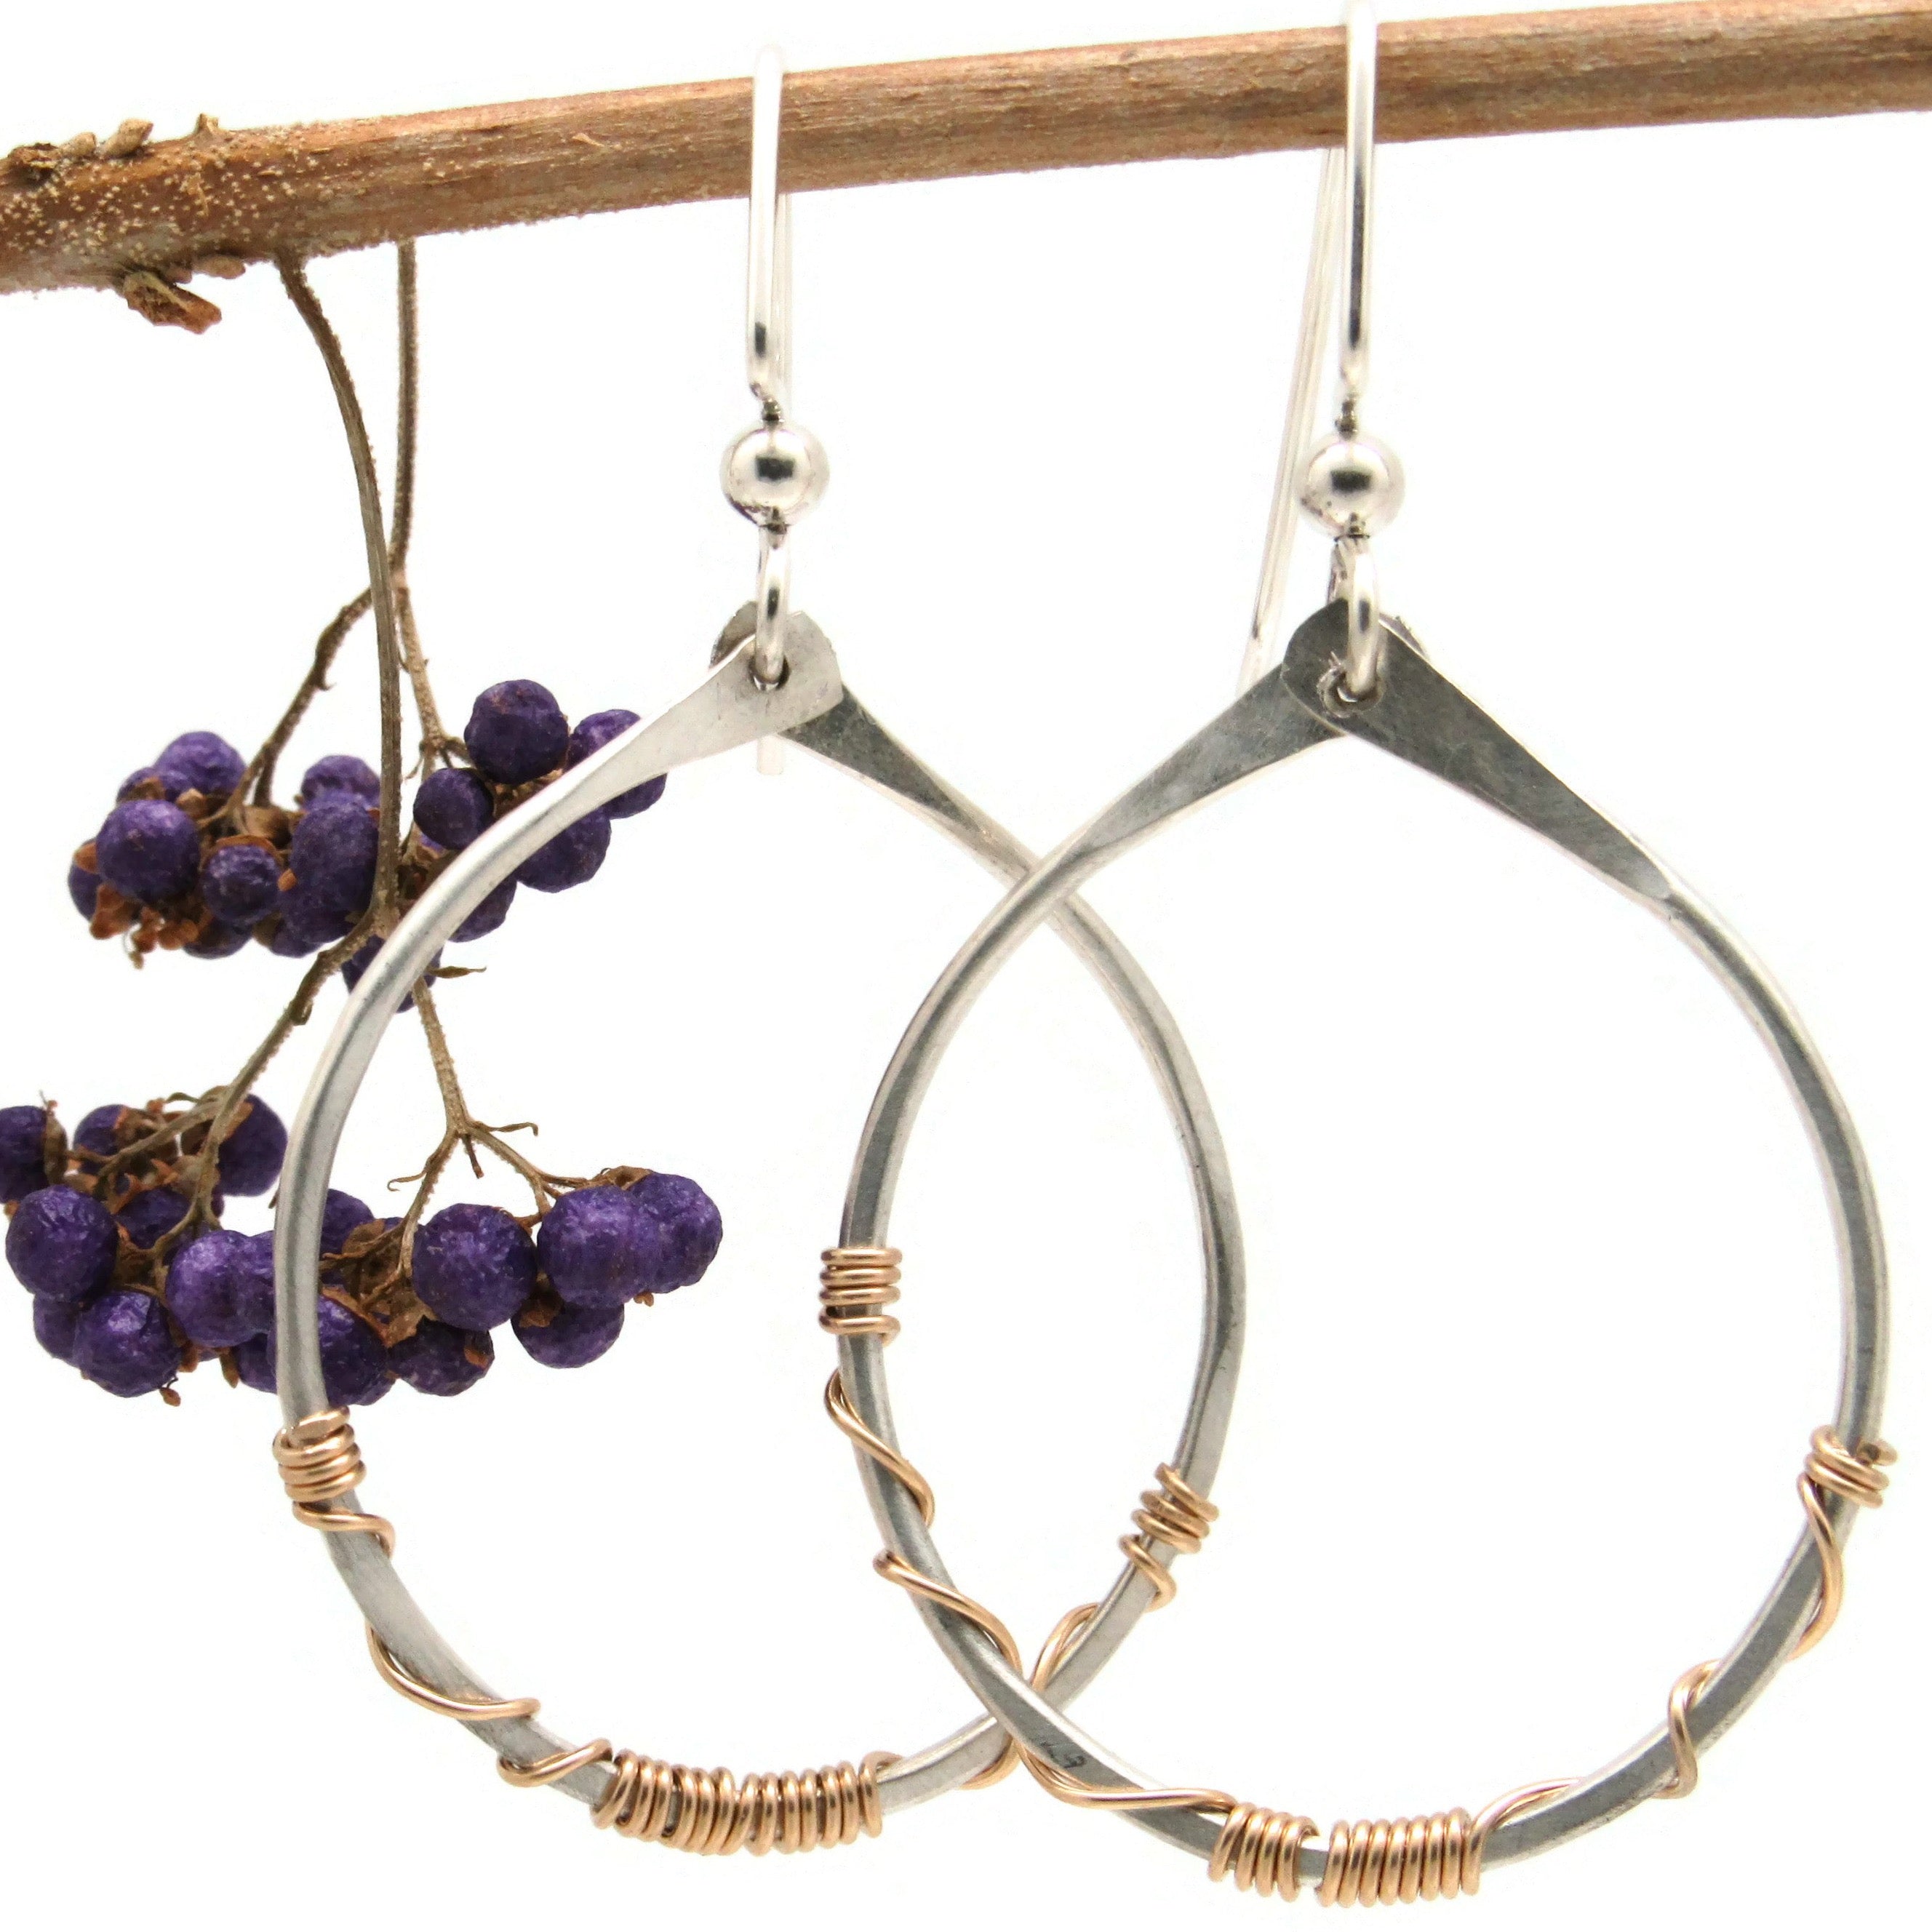 Gold Wrapped Hoop Earrings in Two Sizes